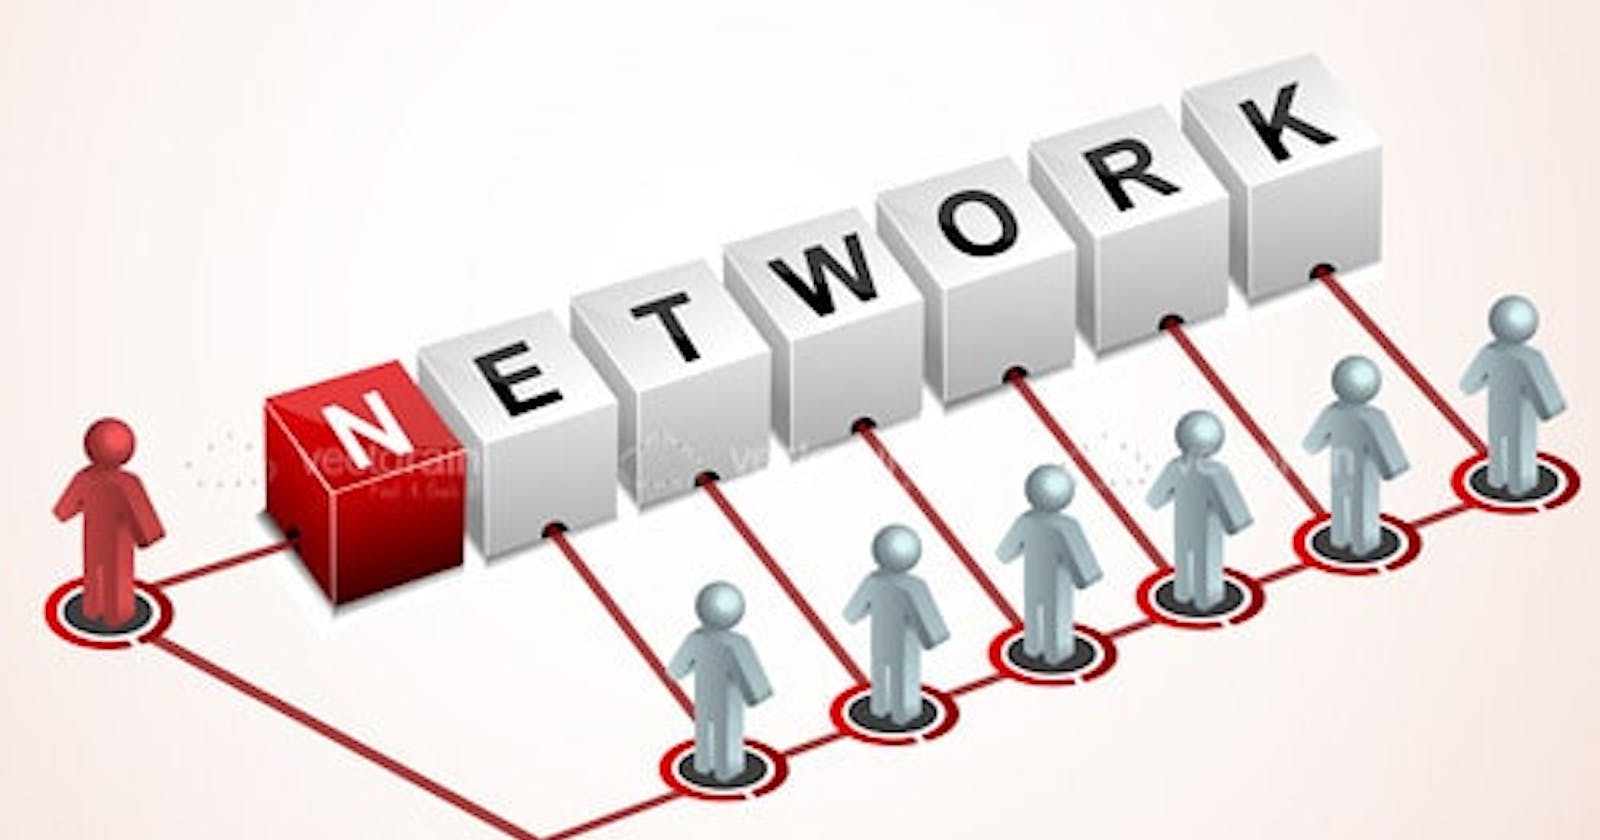 Networking Project